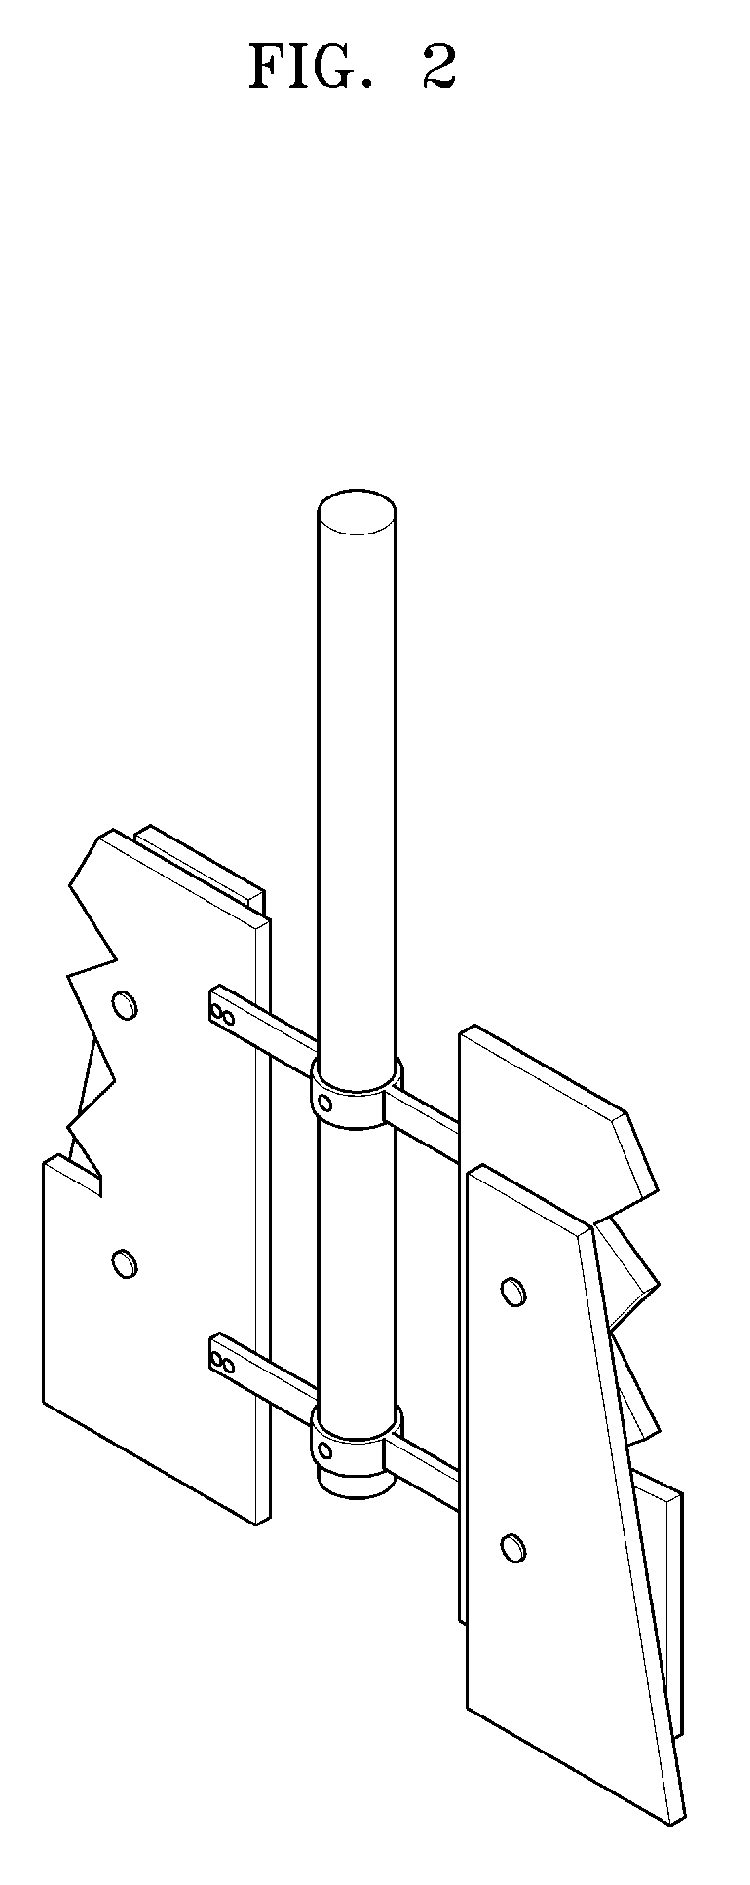 Method of Preparing Wholly Aromatic Polyester